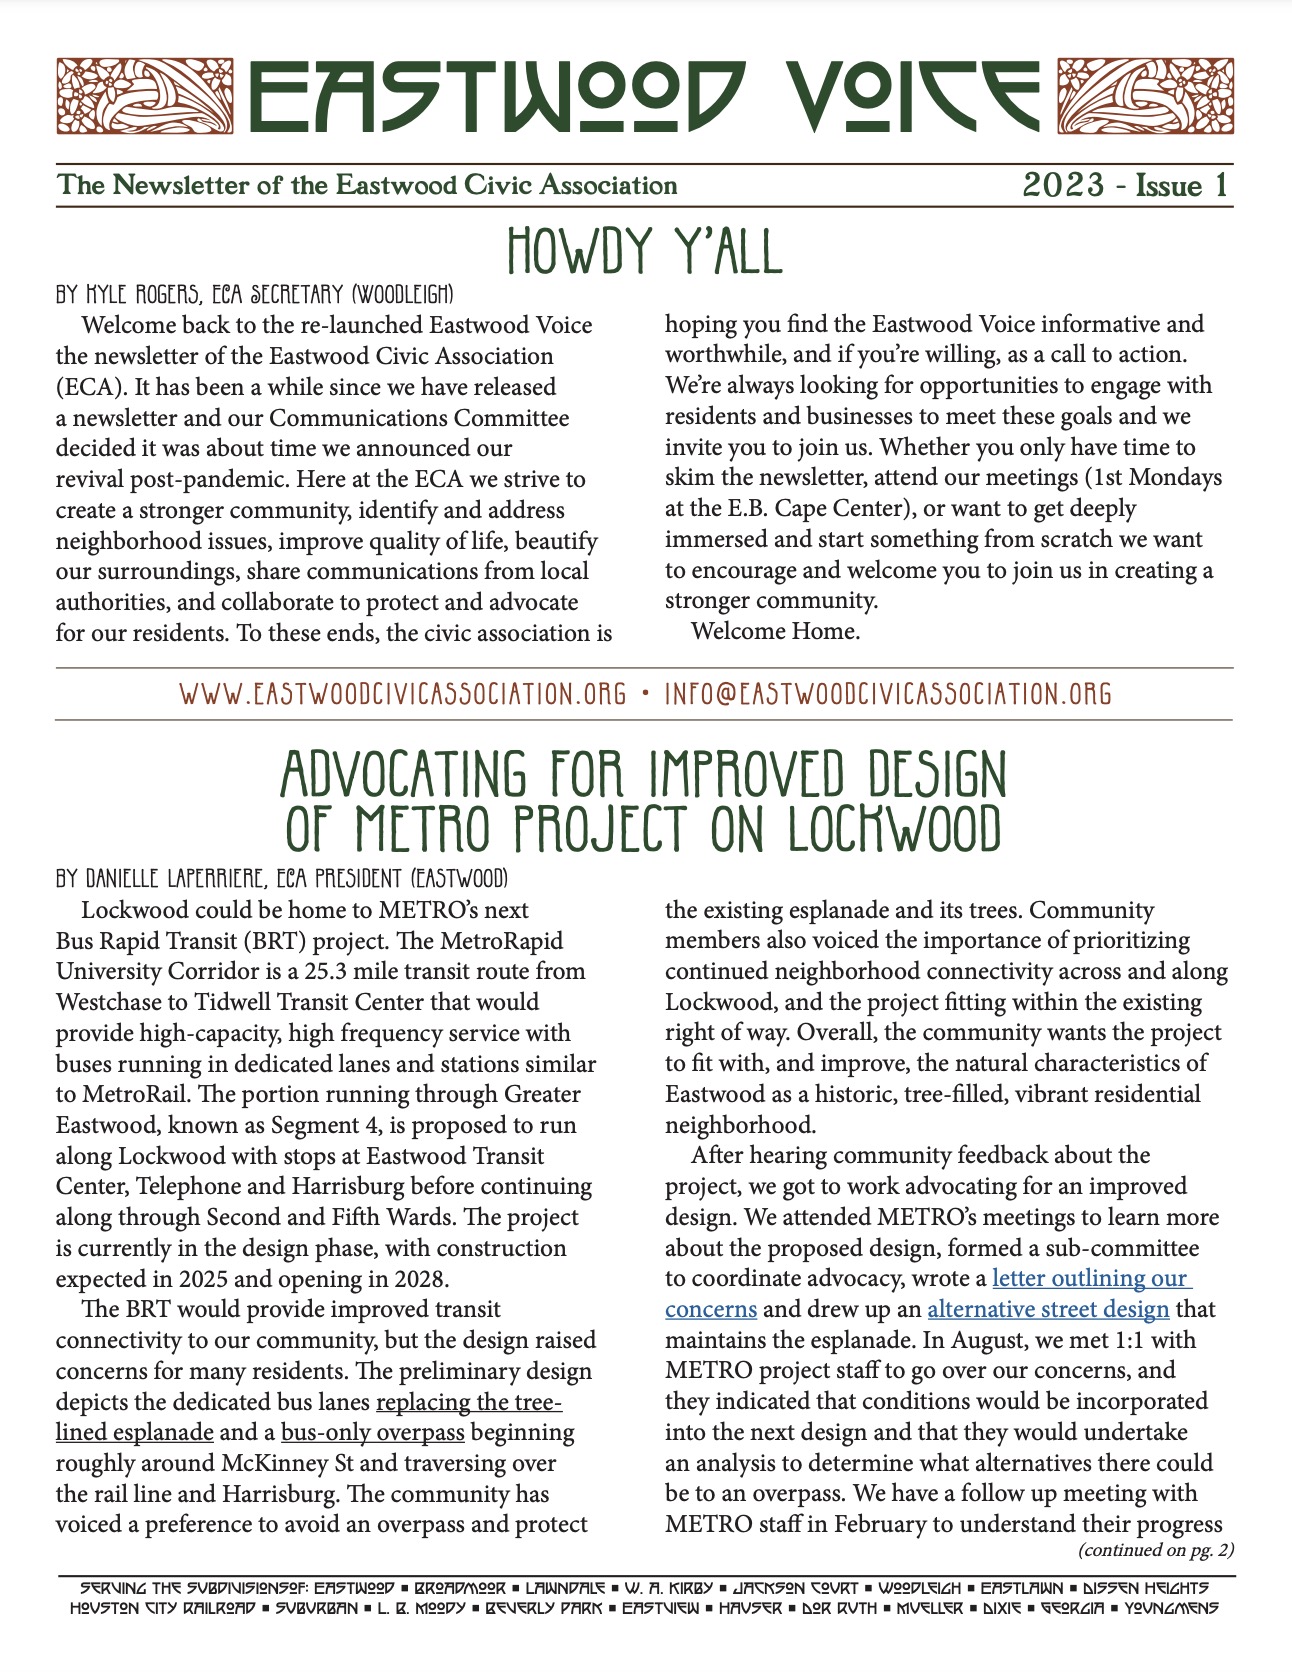 Eastwood Voice – 2023 Issue 1